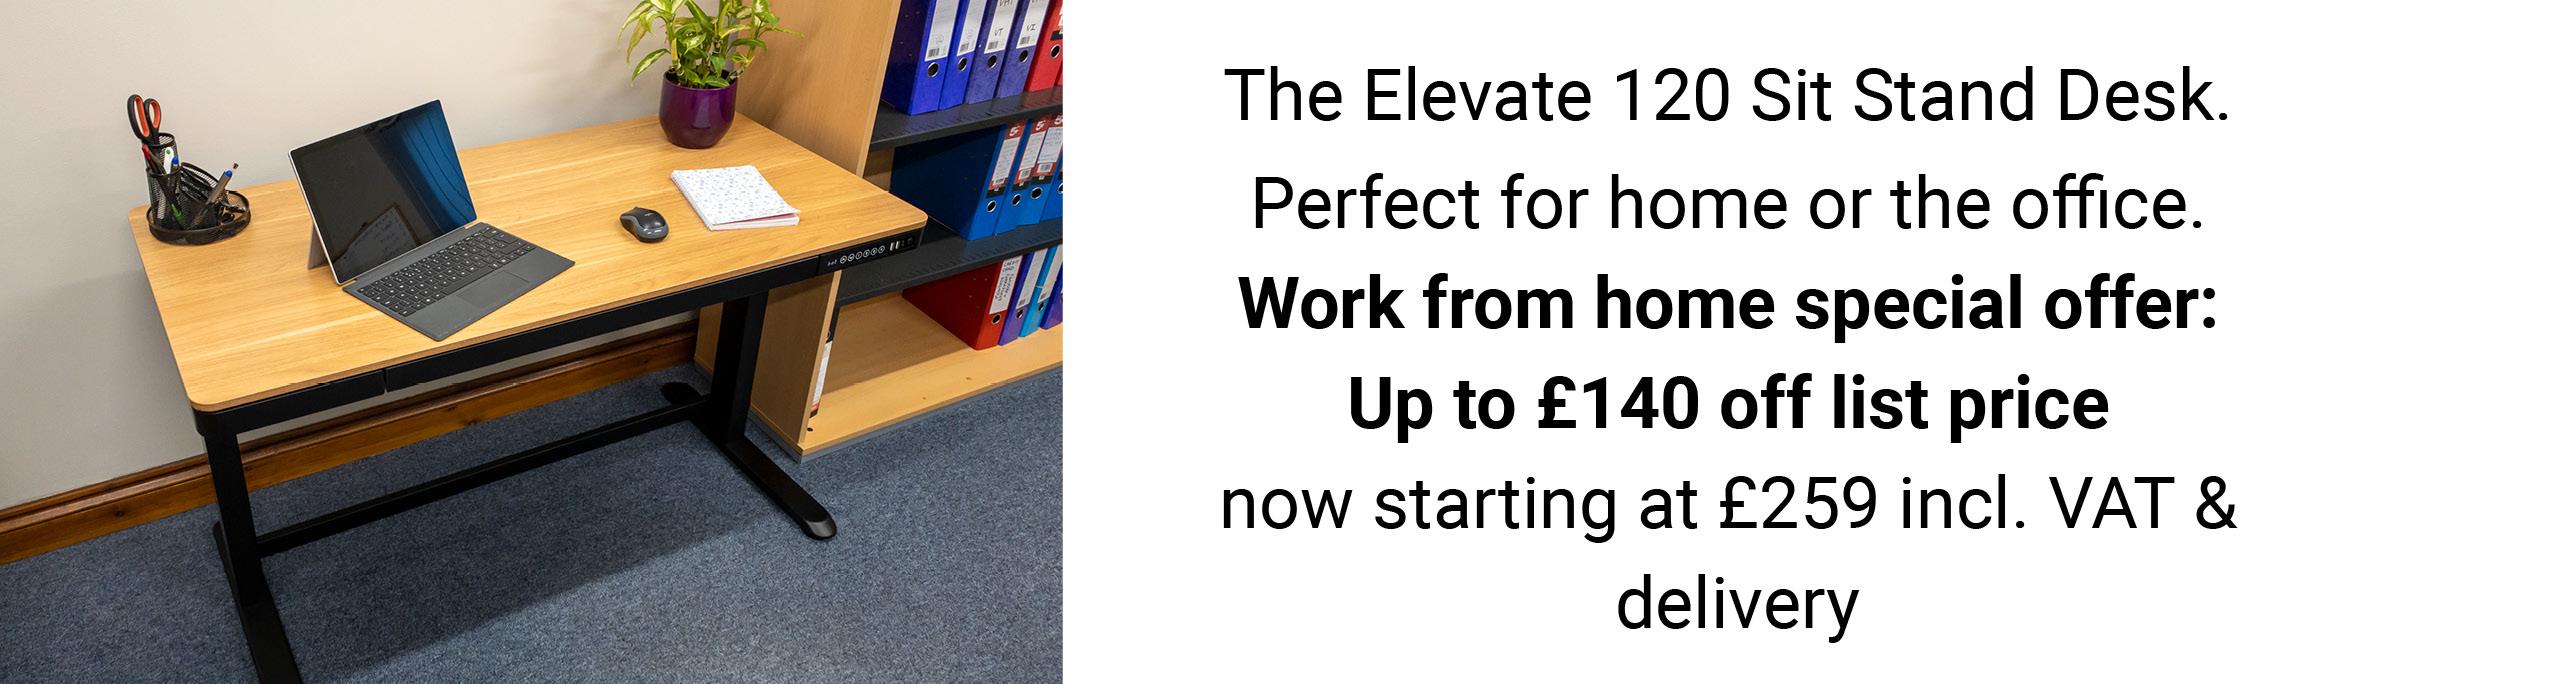 The Elevate 120 Sit Stand Desk. Perfect for home or the office. Work from home special offer.